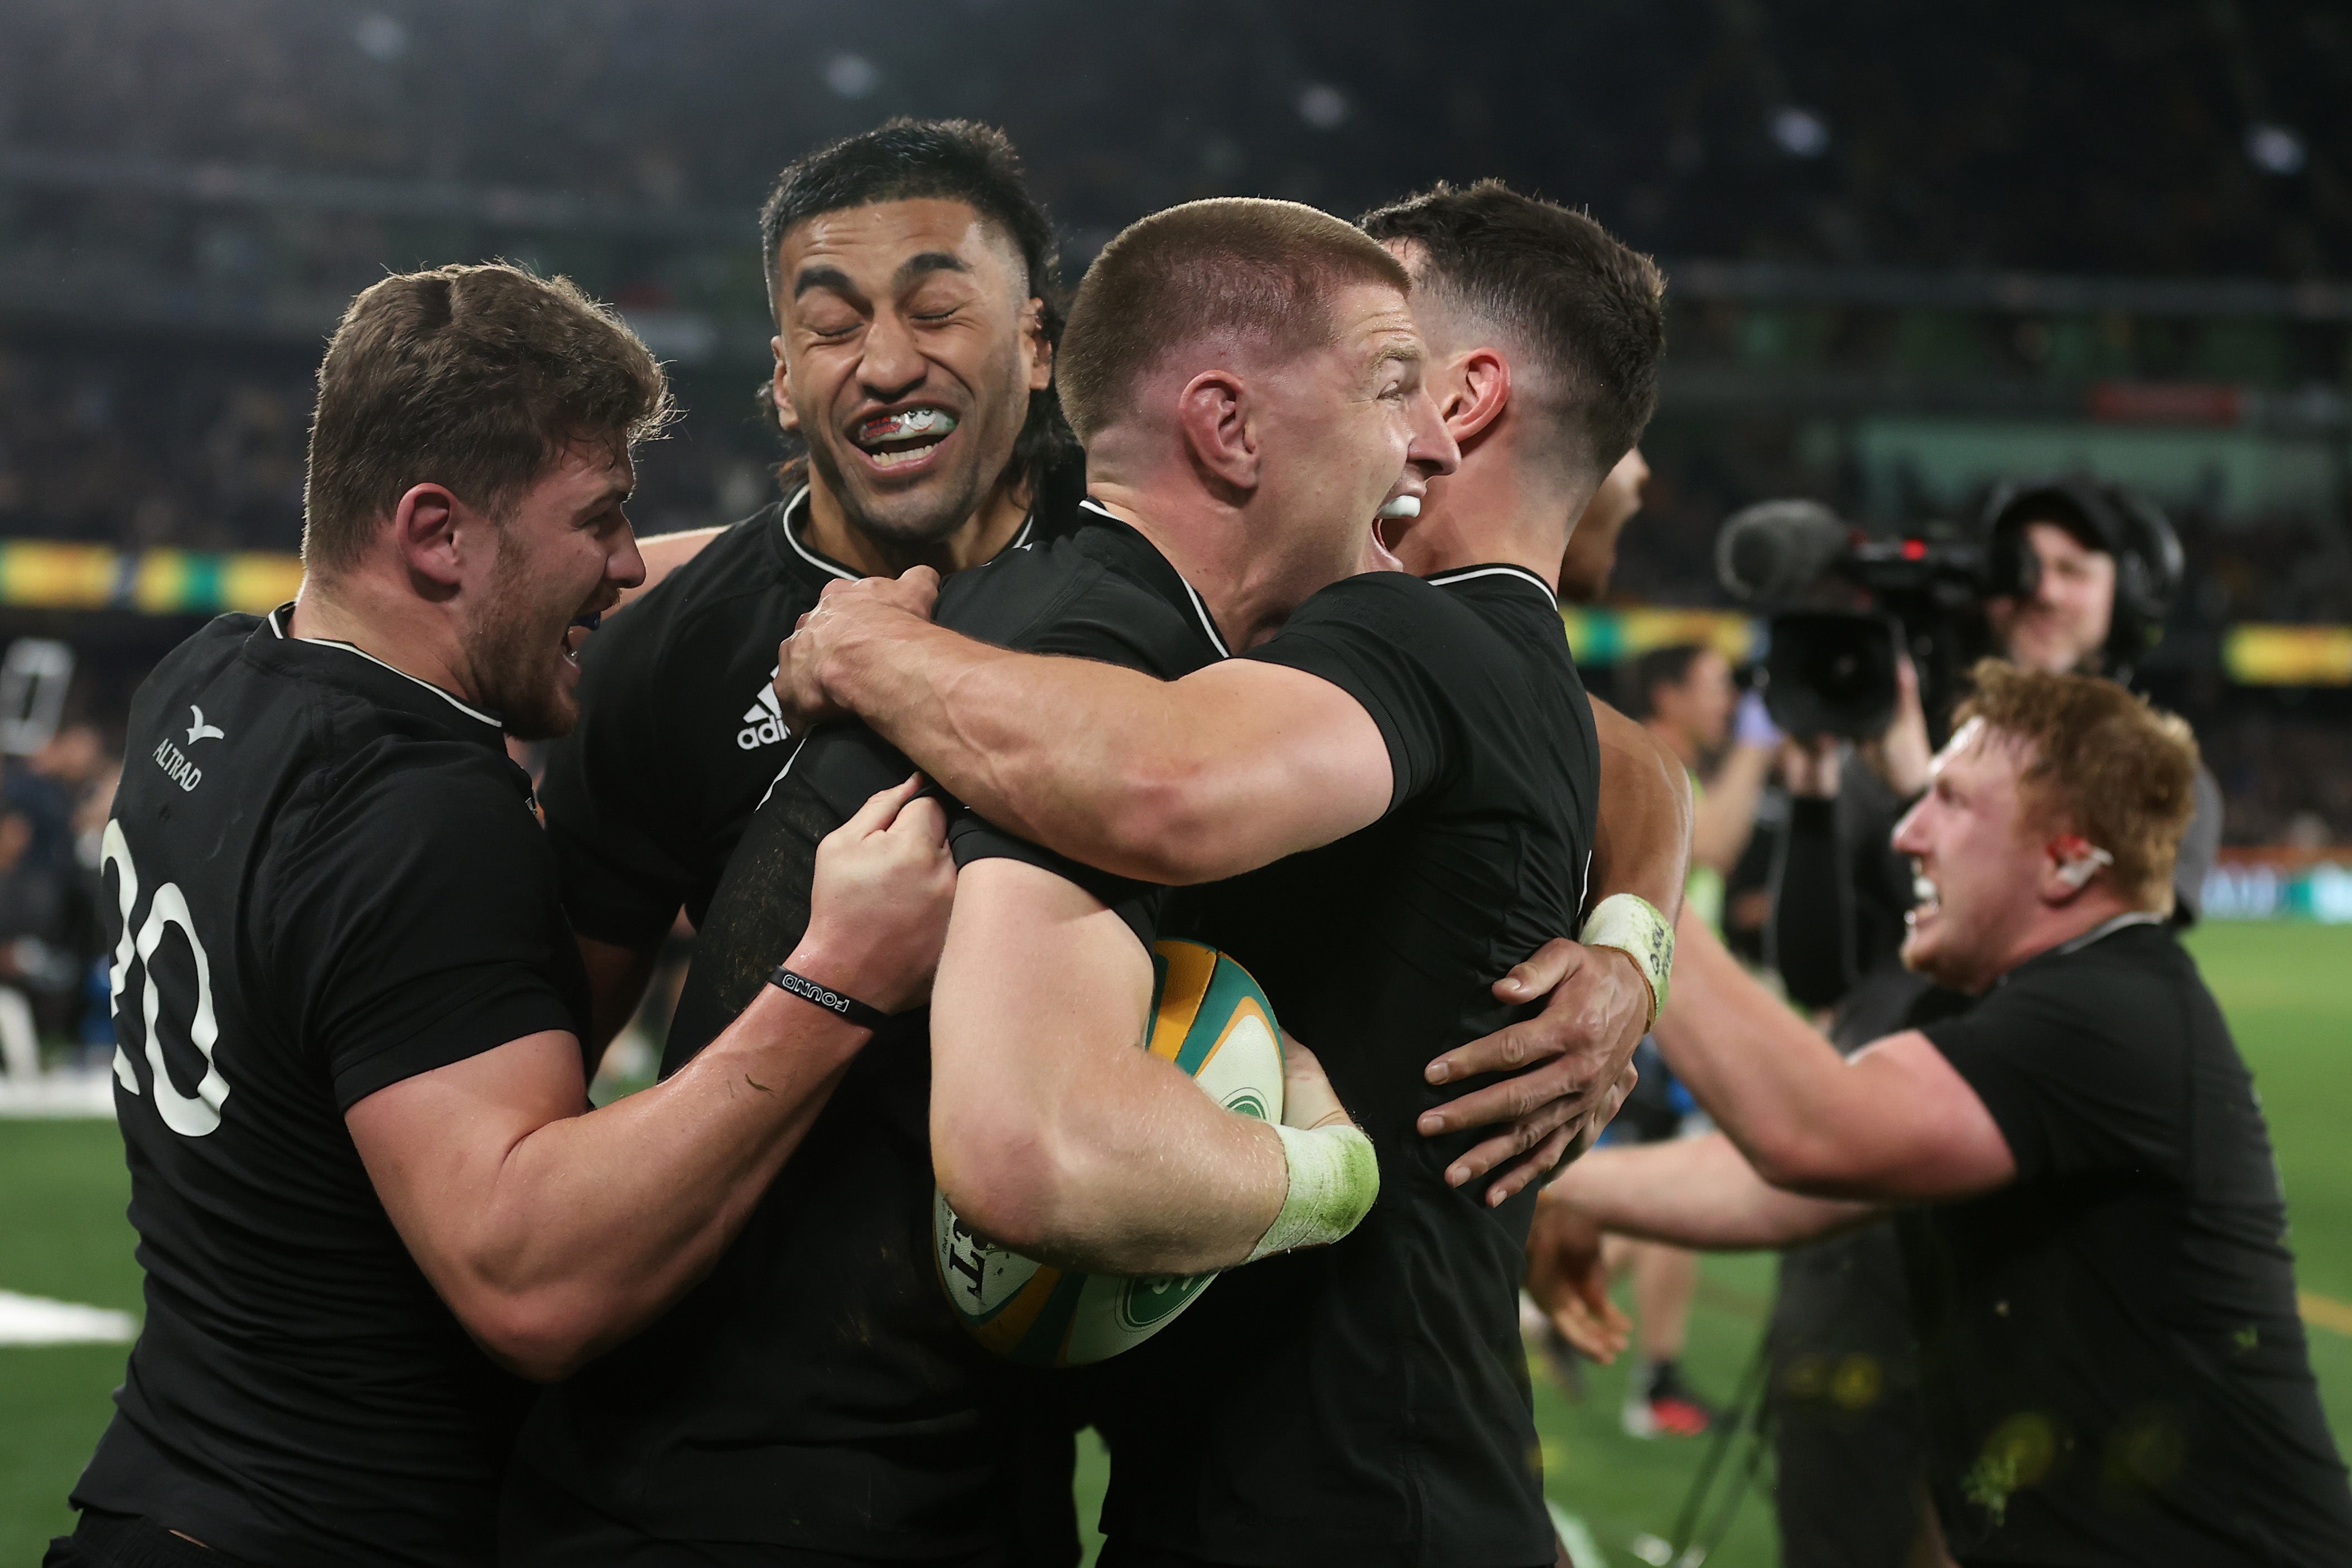 Jordie Barrett of the All Blacks celebrates with teammates after scoring the match-winning try between the Australia Wallabies and the New Zealand All Blacks at Marvel Stadium on 15 September